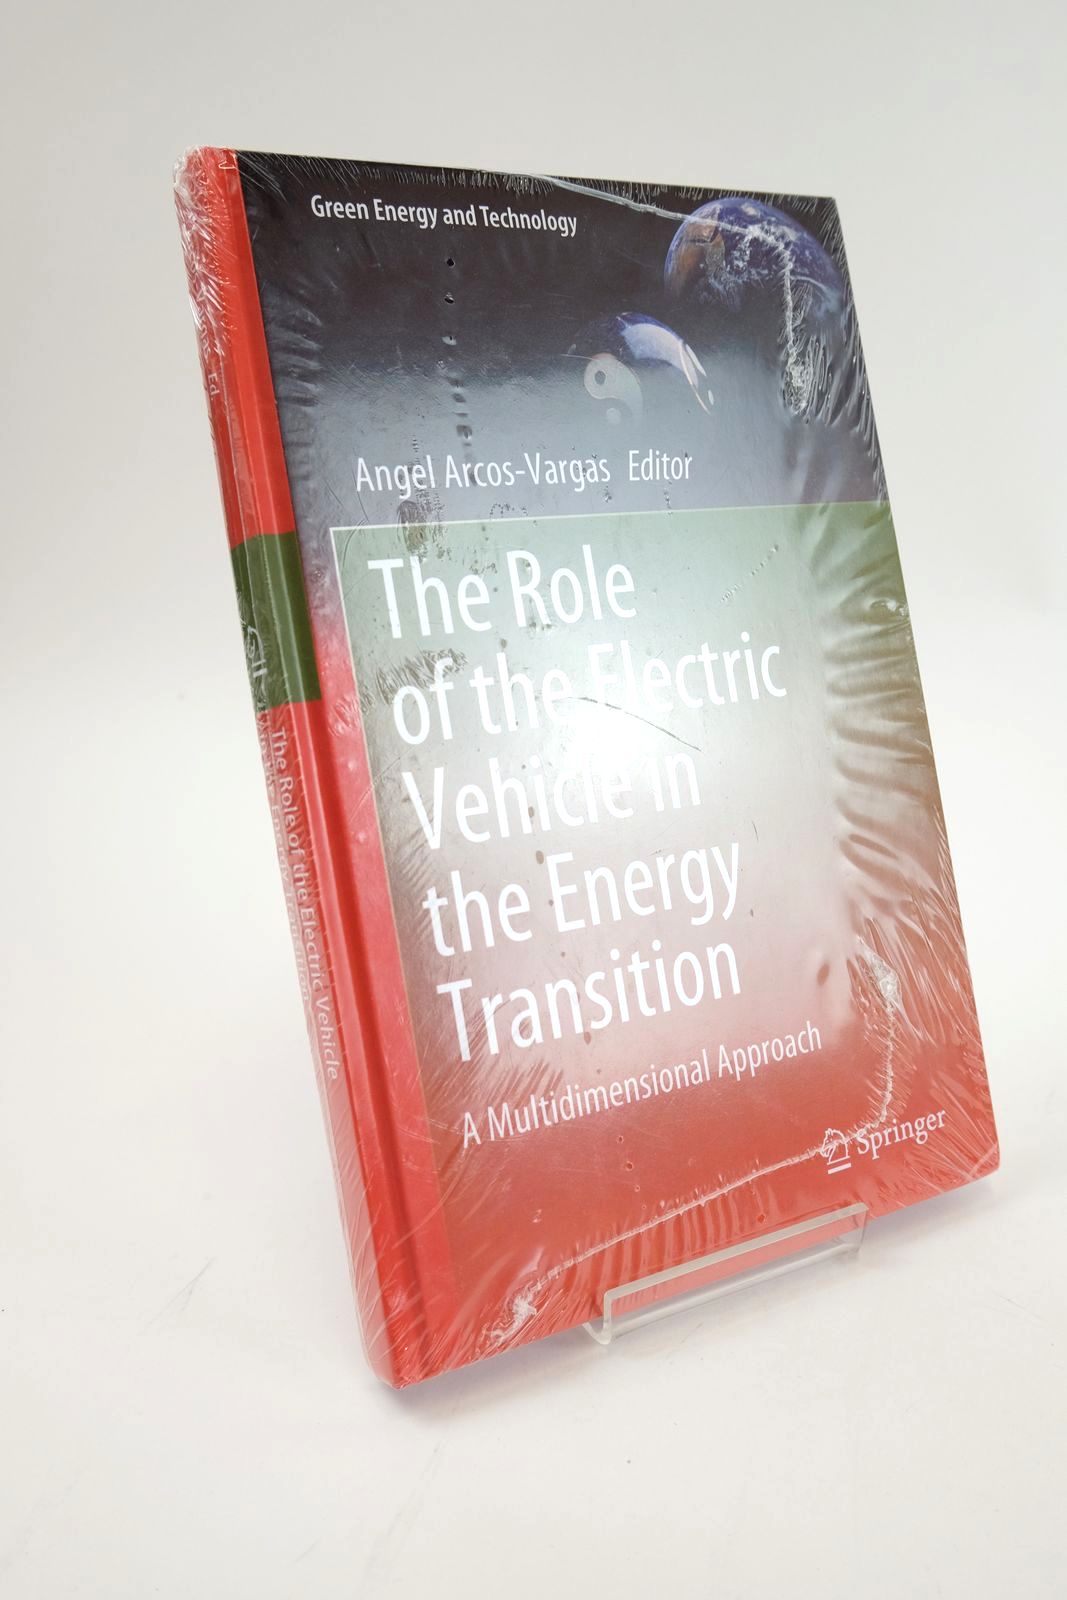 Photo of THE ROLE OF THE ELECTRIC VEHICLE IN THE ENERGY TRANSITION written by Acros-Vargas, Angel published by Springer (STOCK CODE: 1324939)  for sale by Stella & Rose's Books